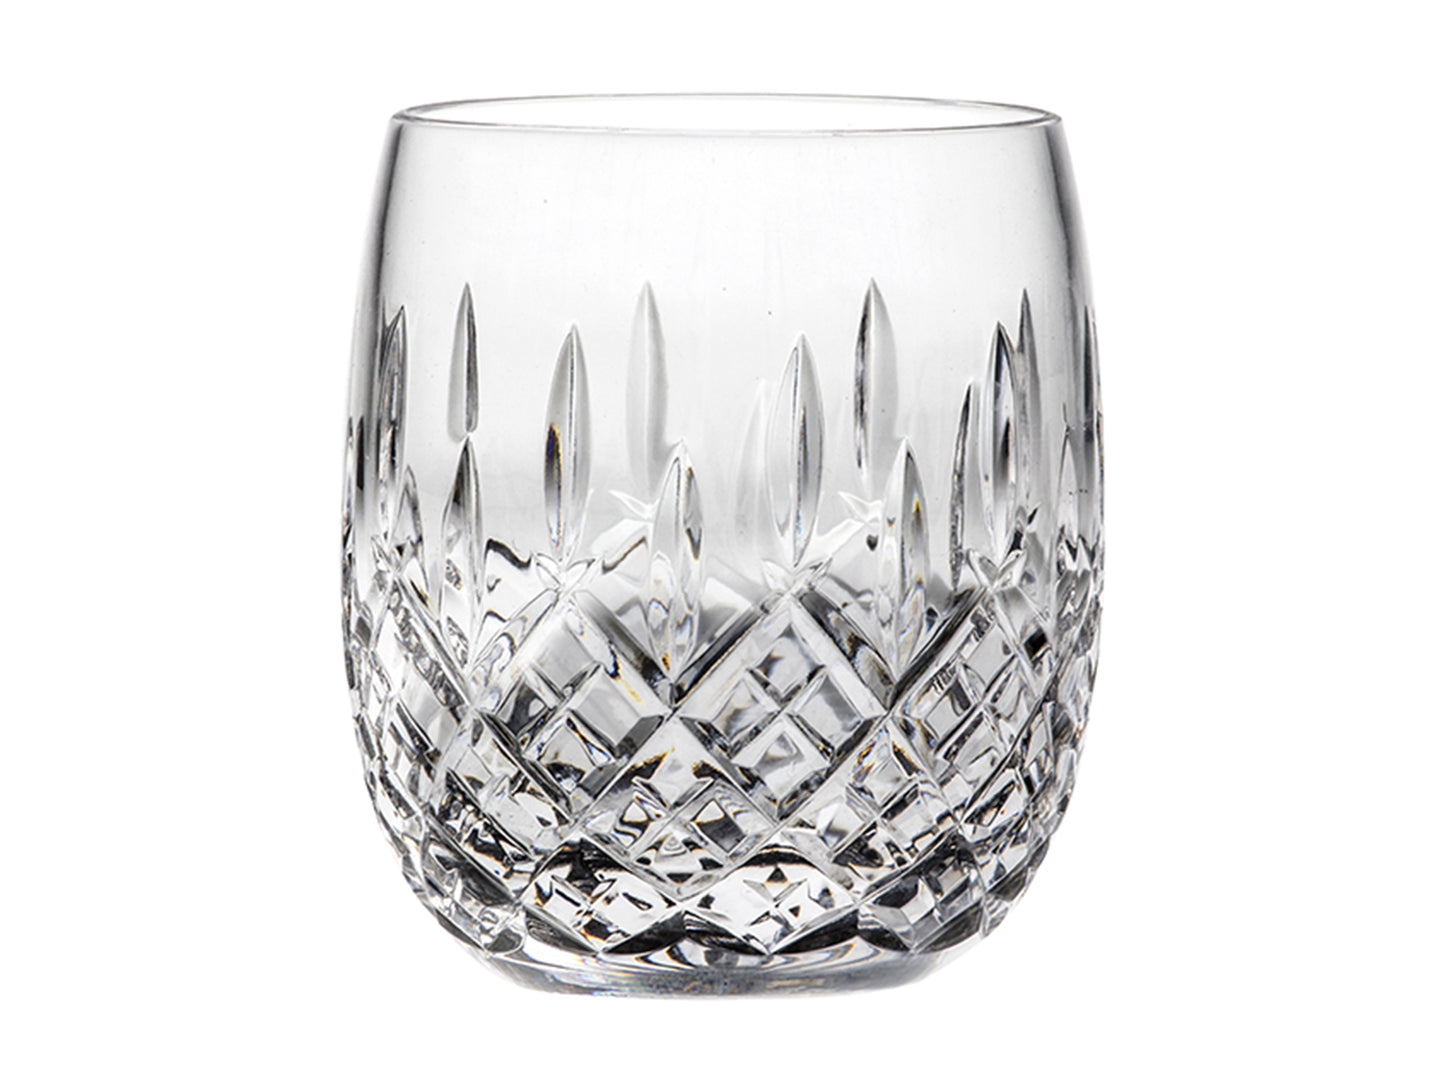 A rounded crystal tumbler with a diamond design cut into the base of the glass, with single darts pointing up towards the rim above it.